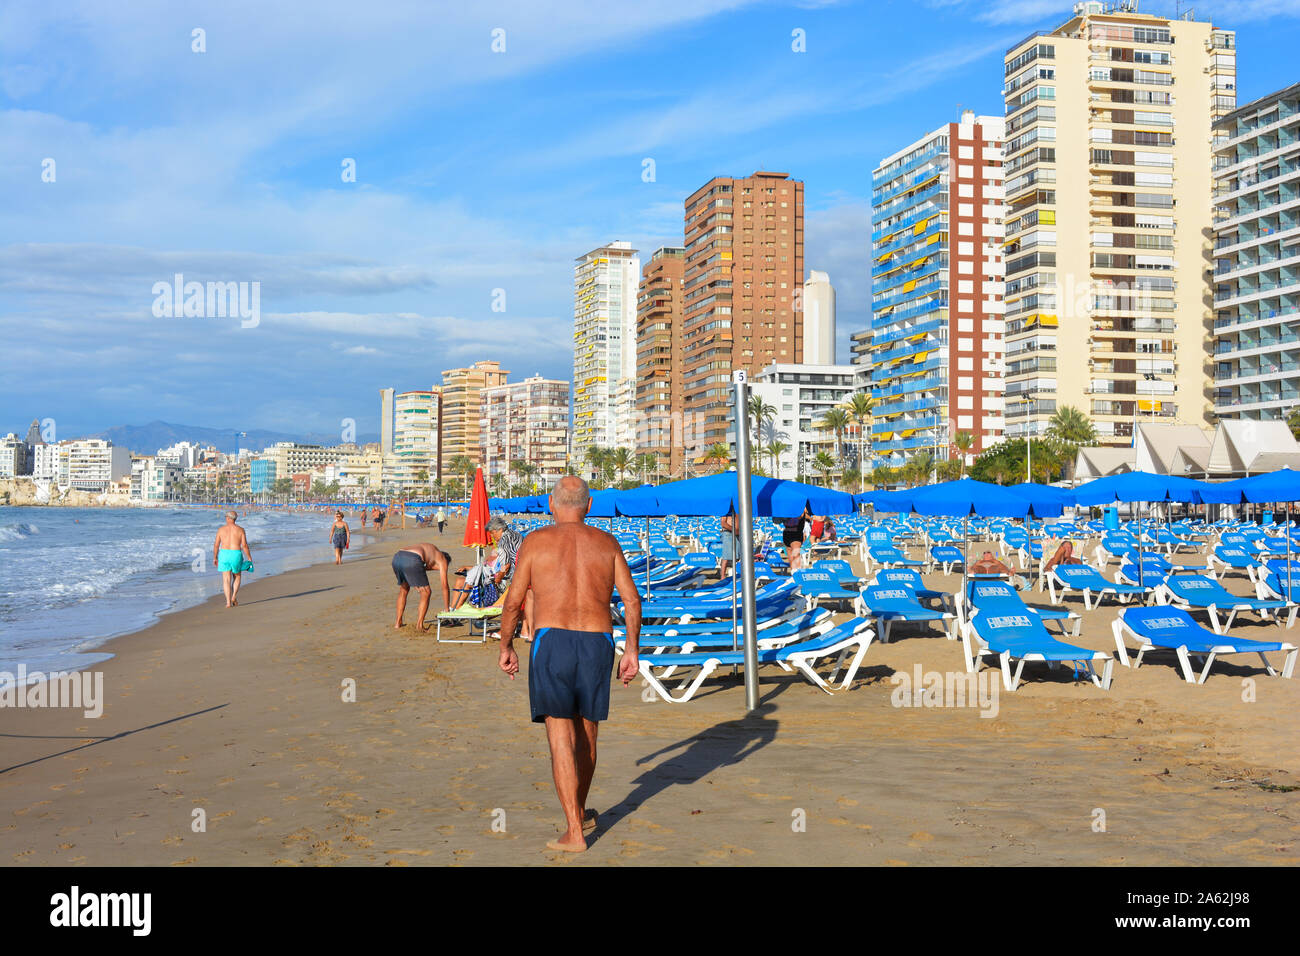 Group of active seniors on Playa Levante beach, with skyscrapers in the background, Benidorm, Alicante Province, Spain Stock Photo